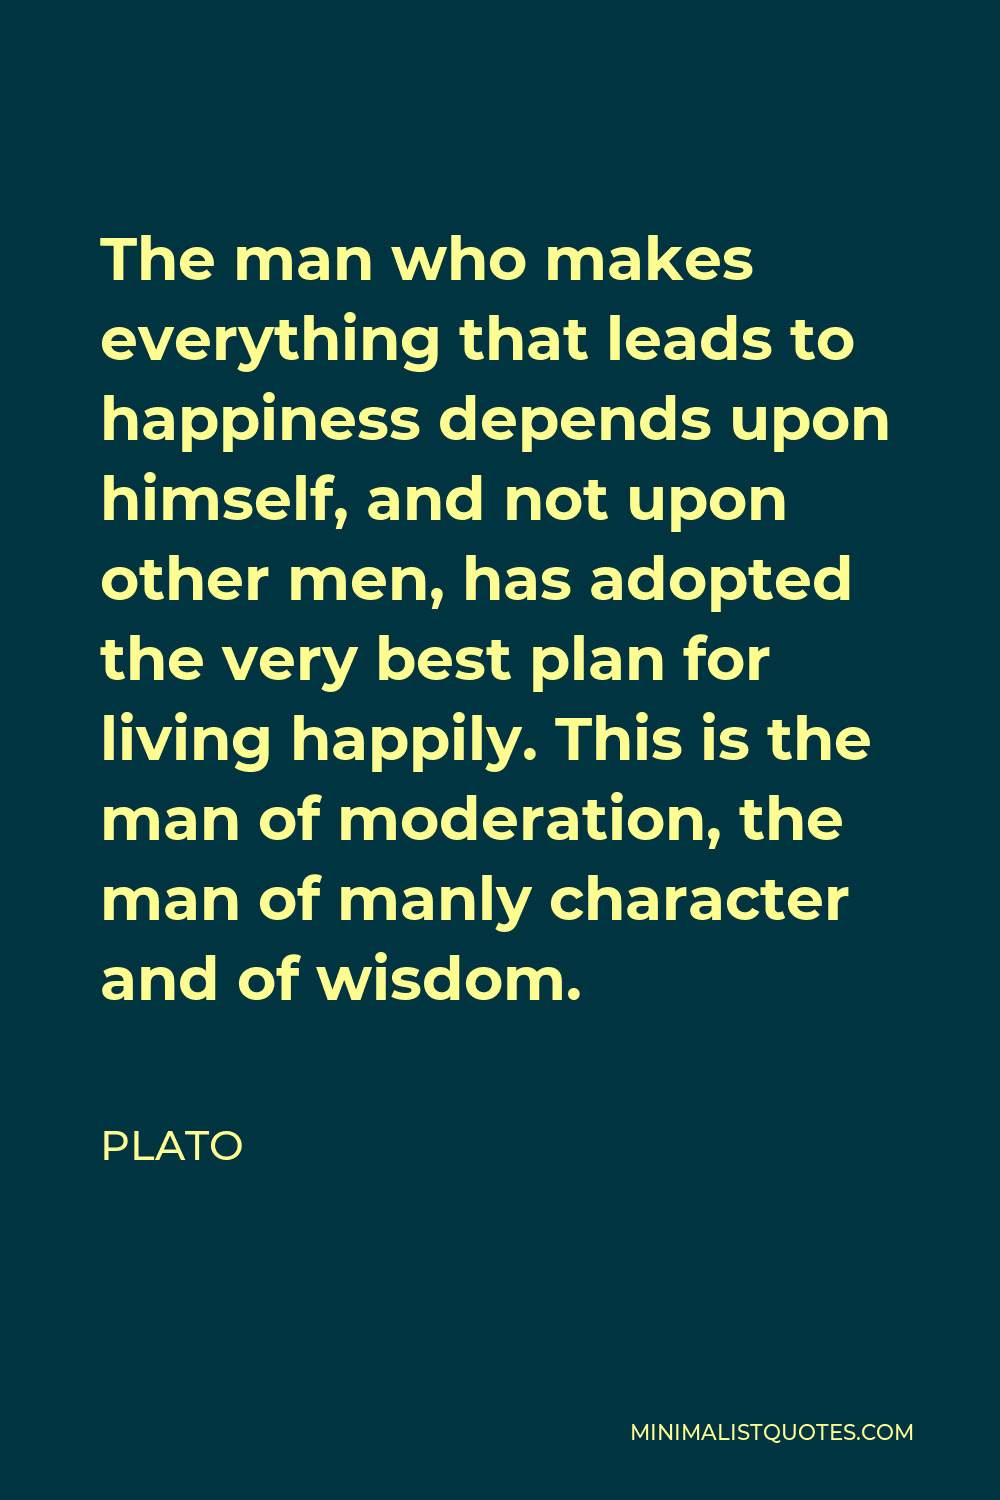 Plato Quote - The man who makes everything that leads to happiness depends upon himself, and not upon other men, has adopted the very best plan for living happily. This is the man of moderation, the man of manly character and of wisdom.